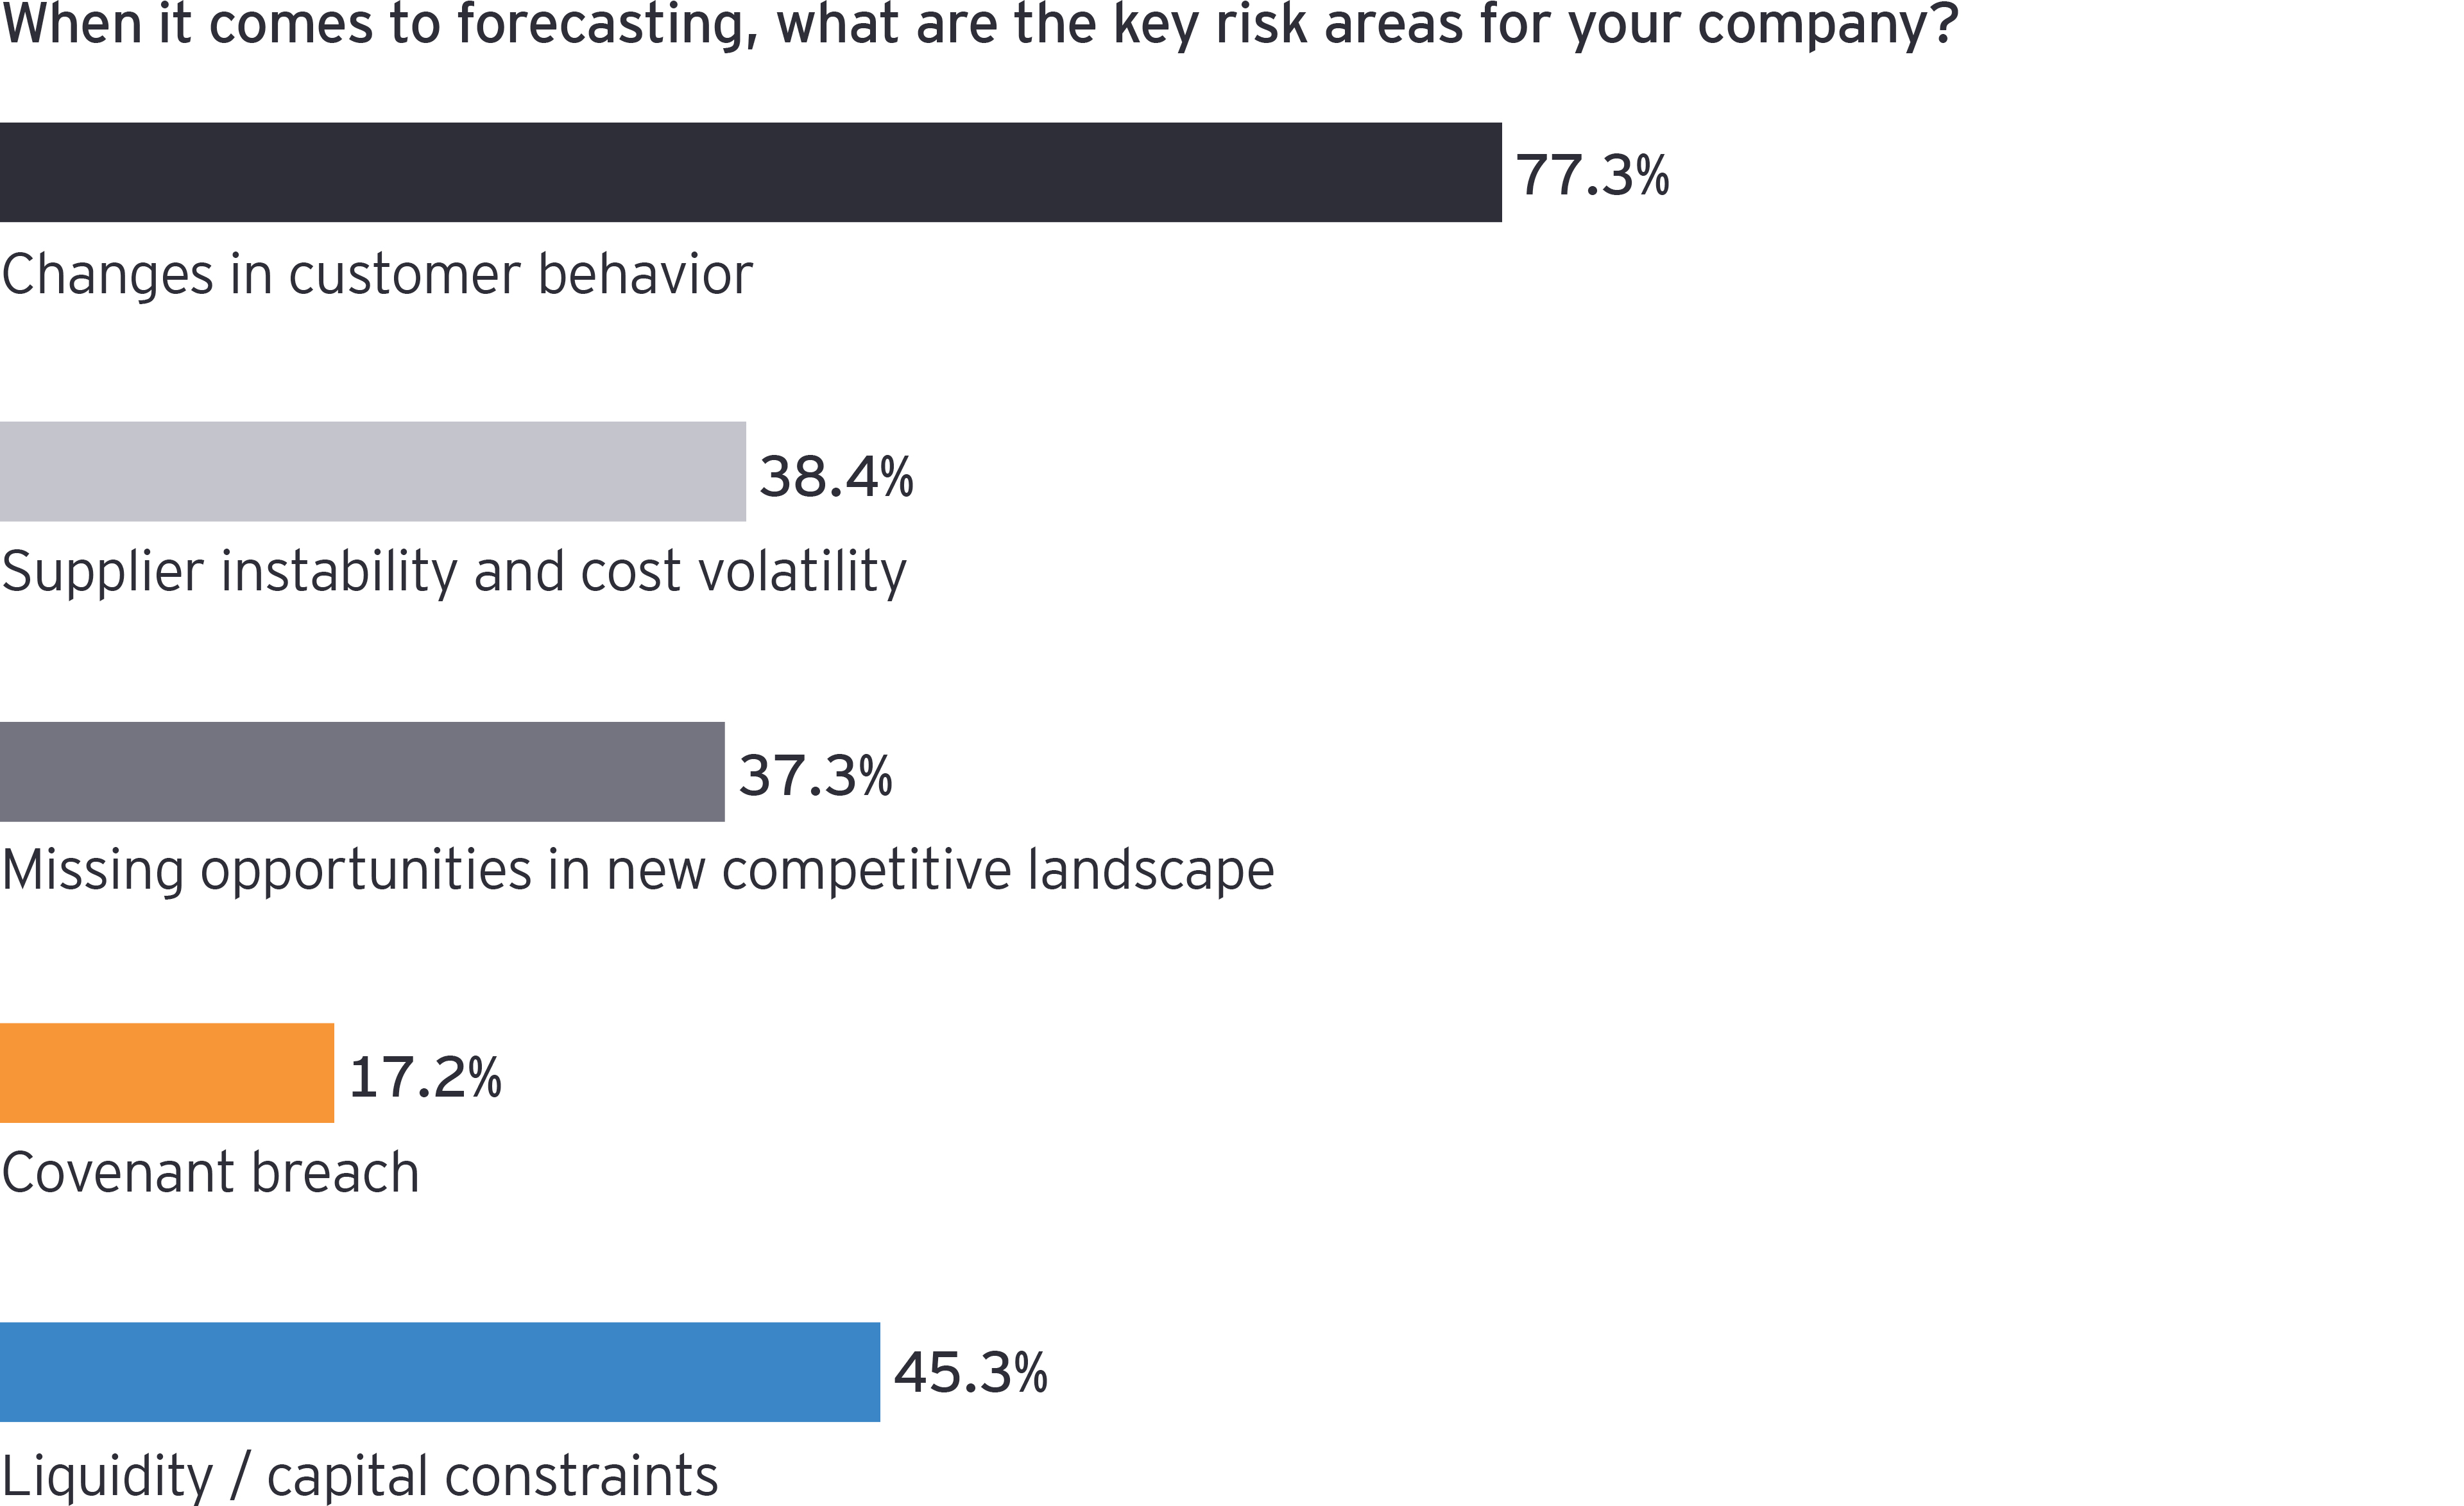 Key risk areas for your company forecasting